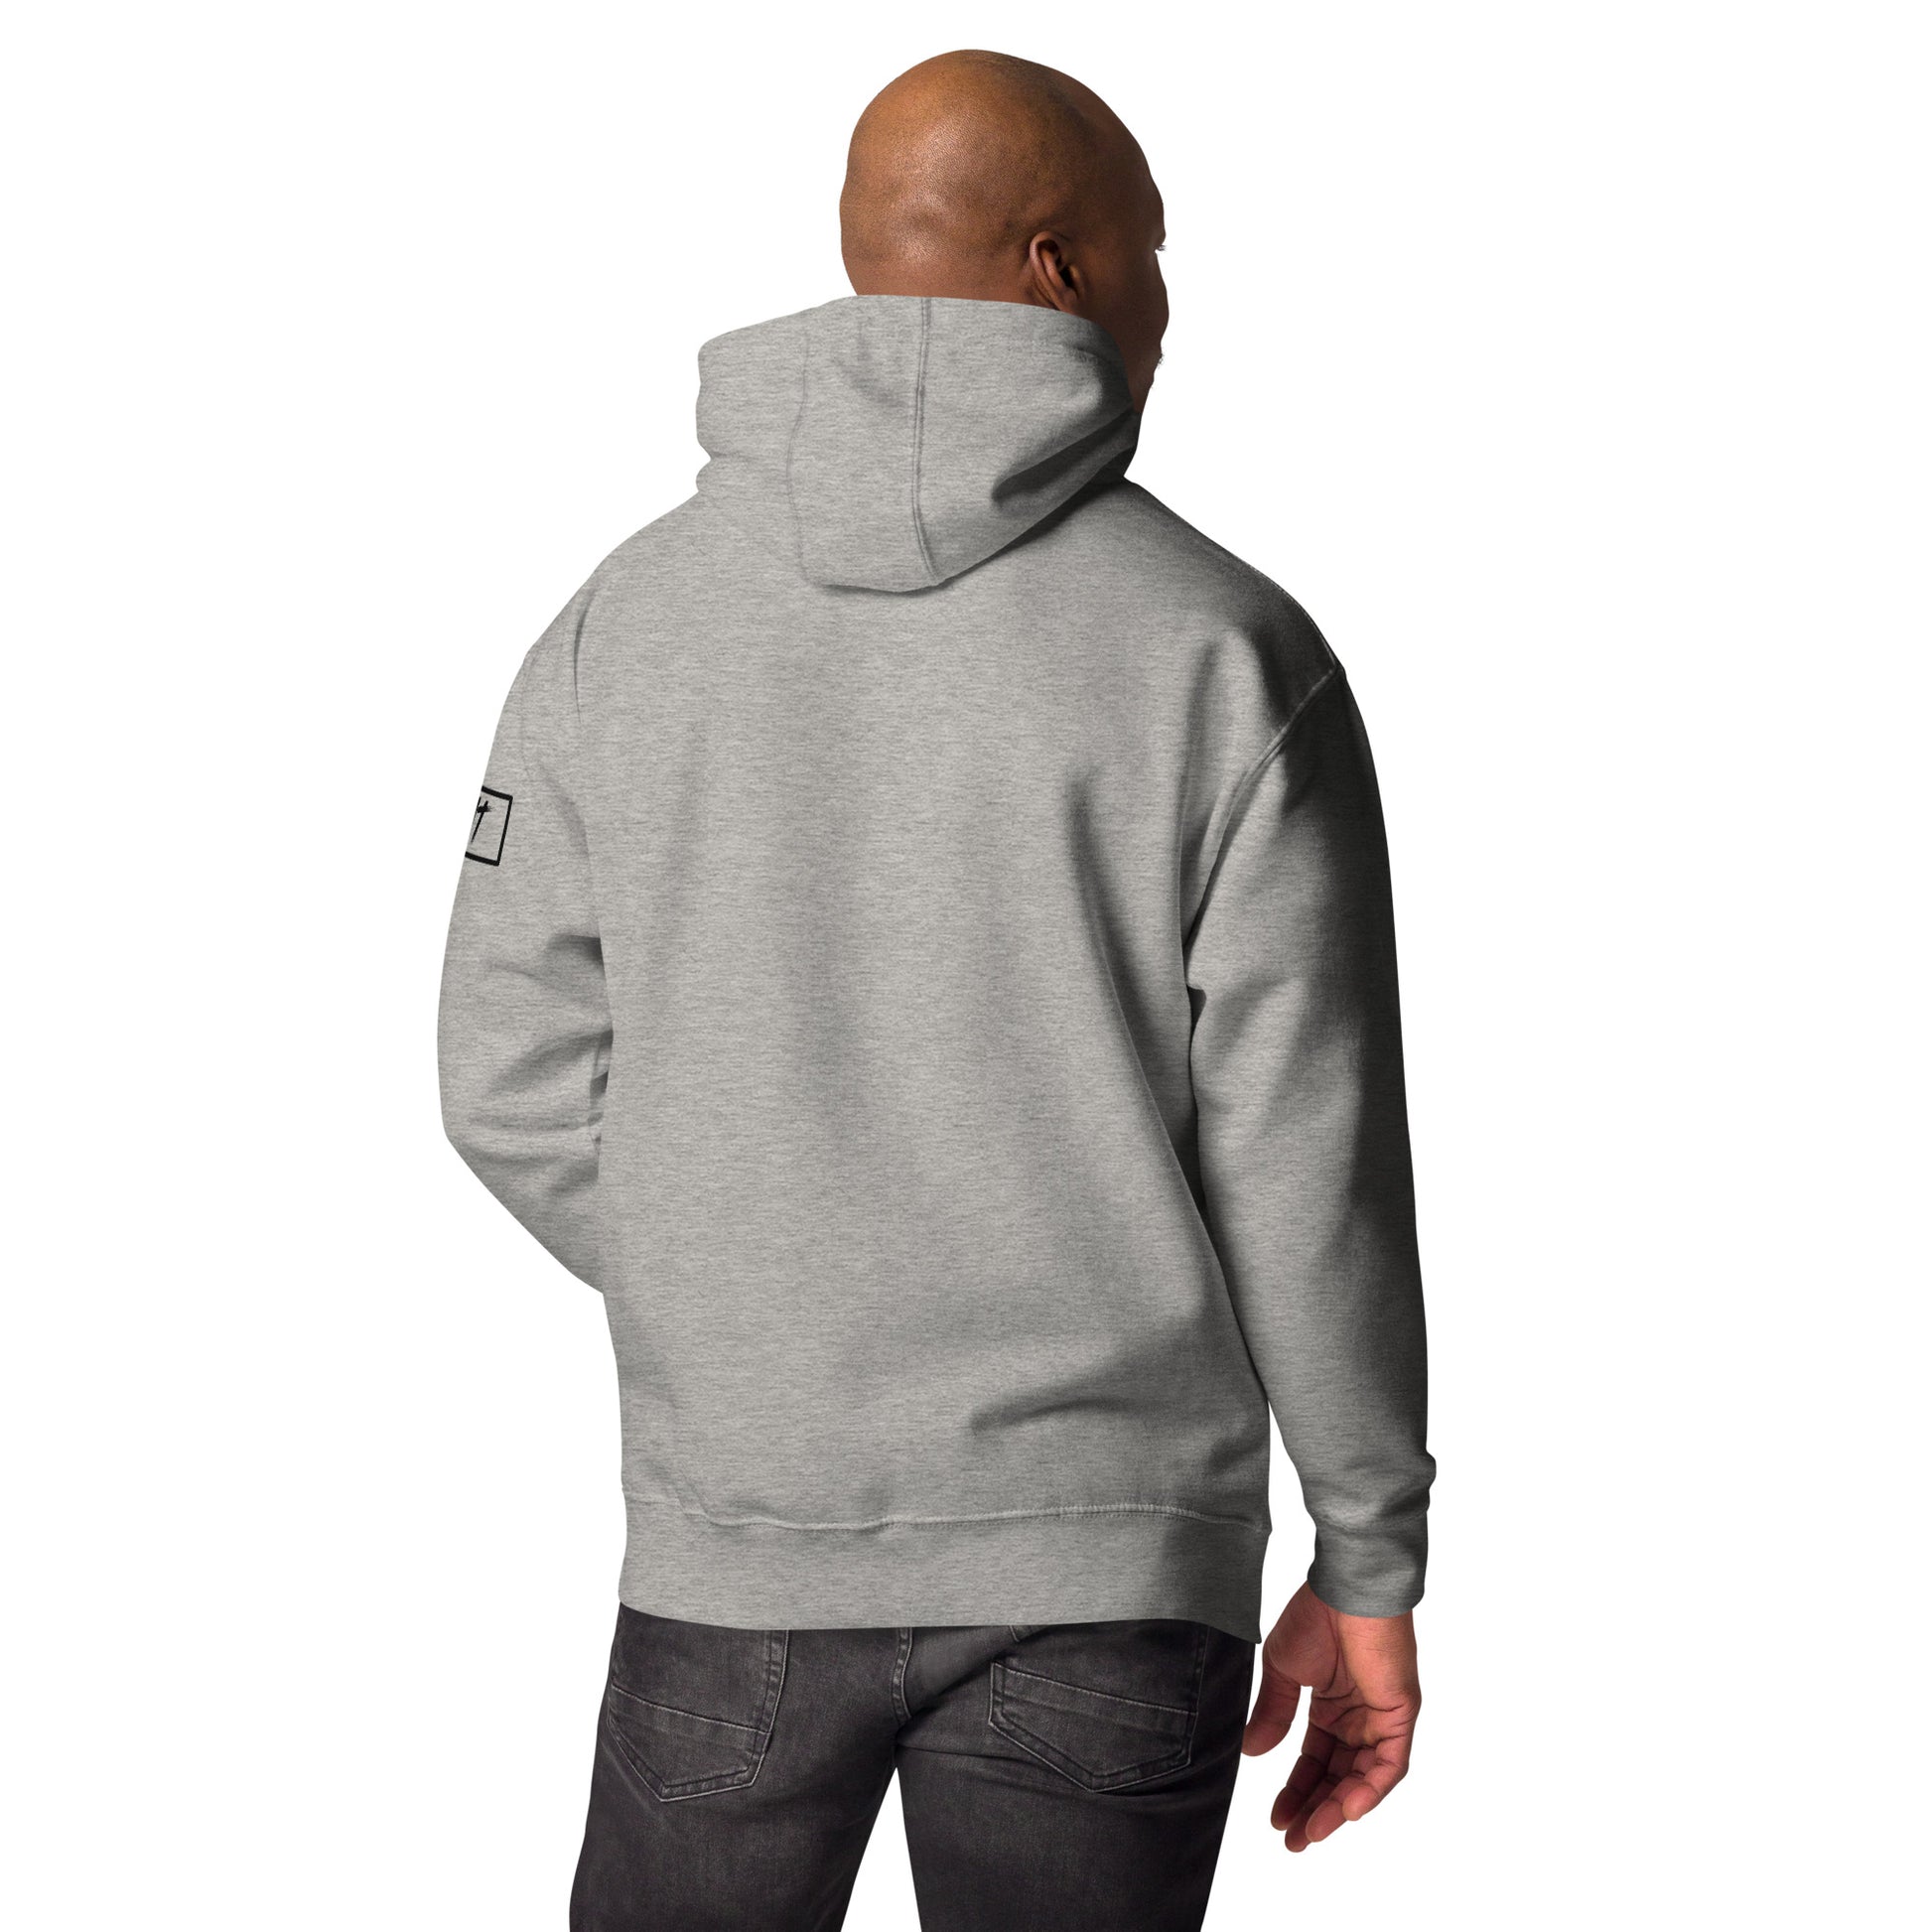 Back-Side view of Lake McDonald in Glacier National Park Montana Carbon Grey Hoodies for Men from Park Attire